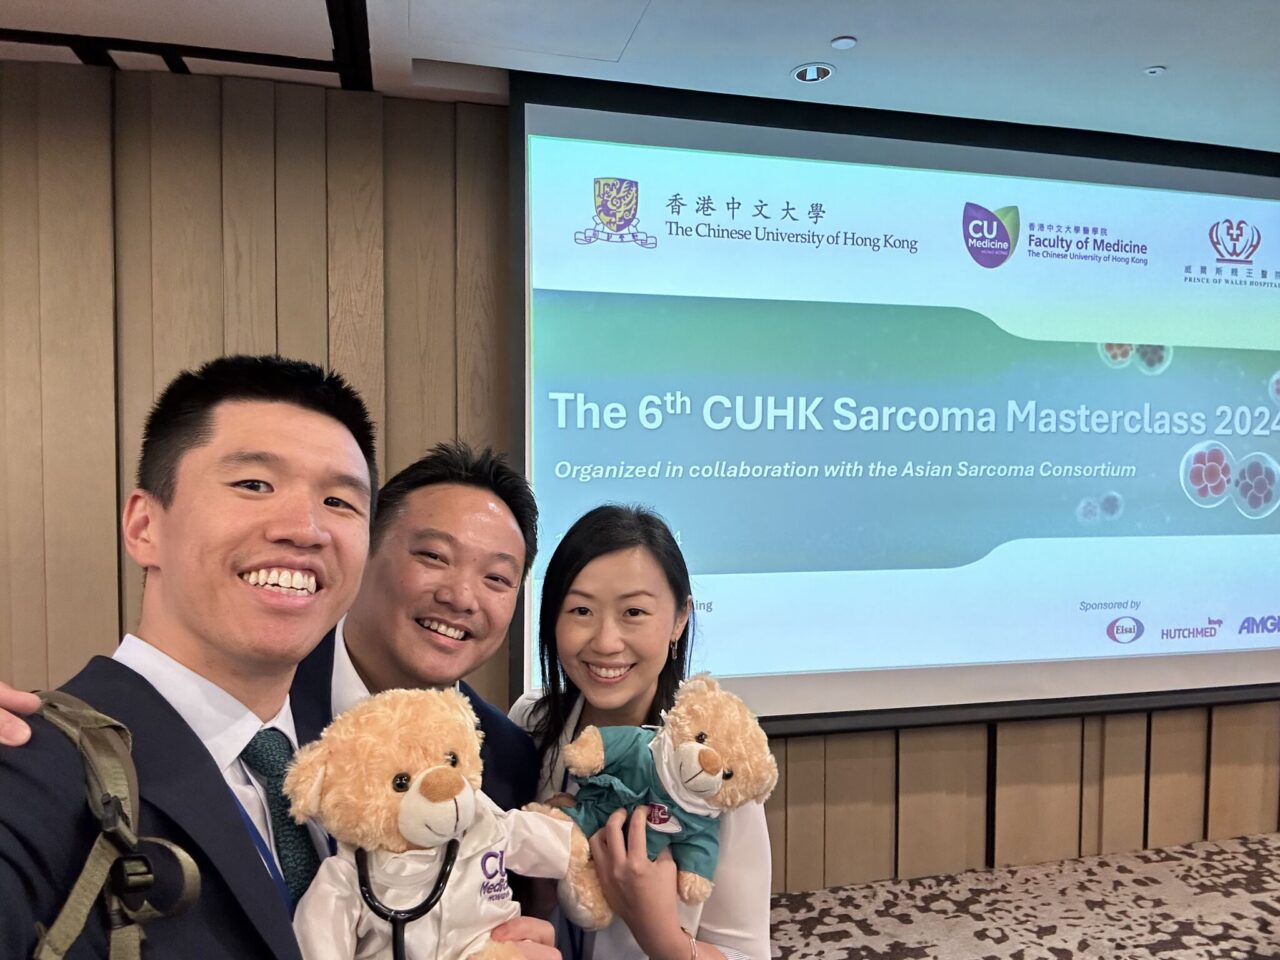 Herbert Loong: Happy to see what other specialties are doing for sarcoma care